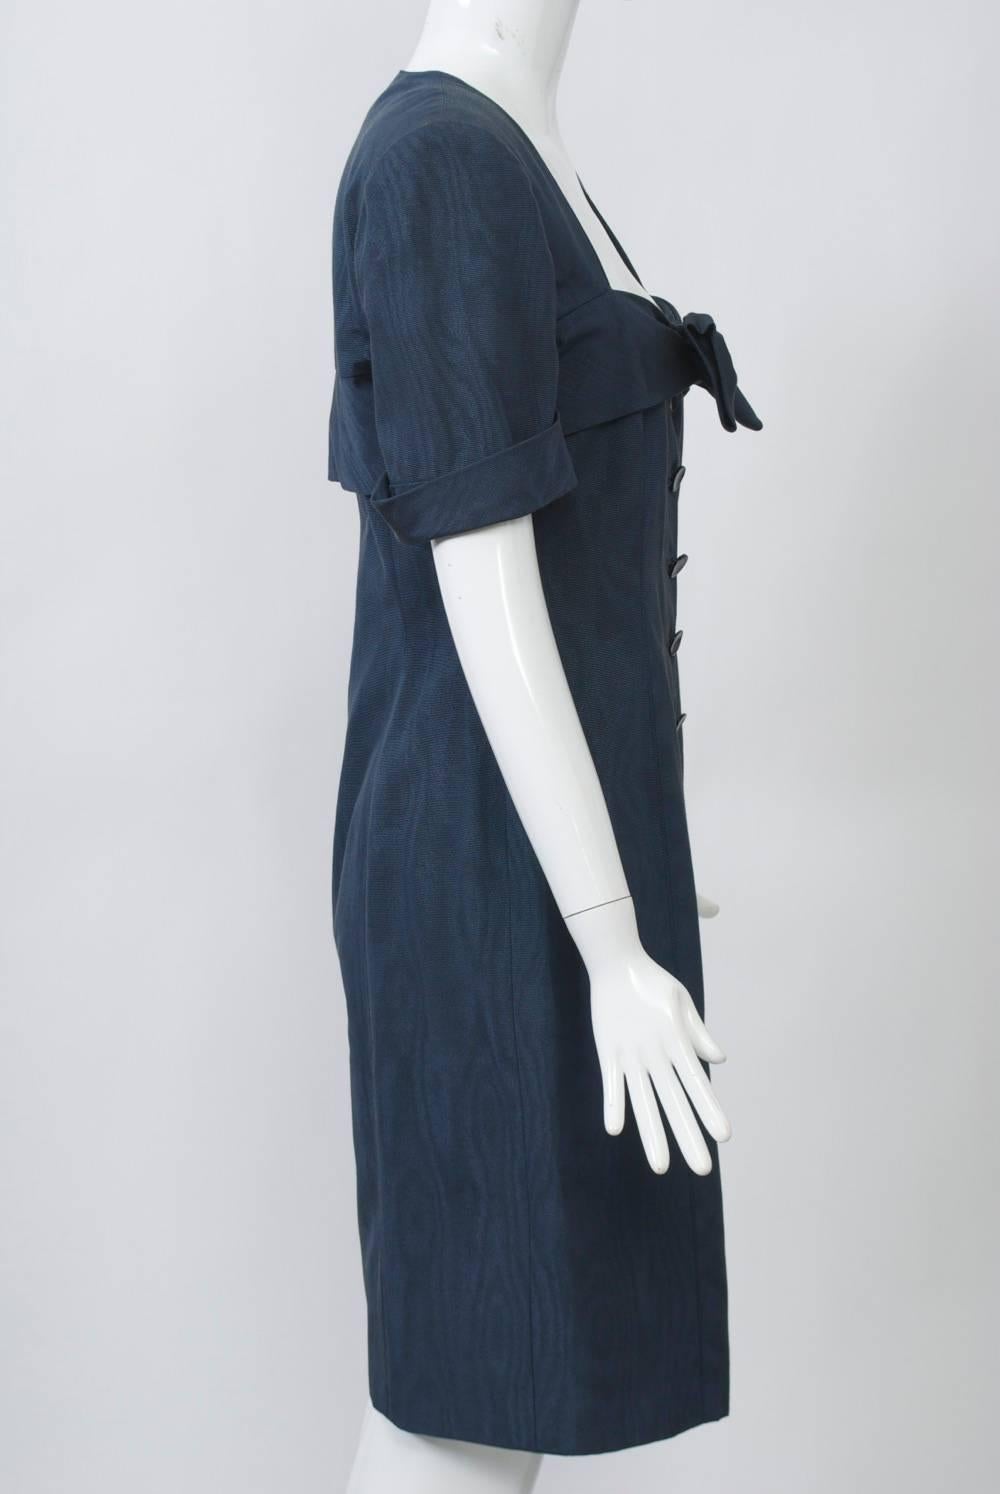 Steel blue moiré dress by Ungaro featuring a low square neckline with large bow attached to a wide overlaid band that circles the dress across the bust and back. Buttons down the front. Short sleeves with turned-back cuffs and squared shoulders with